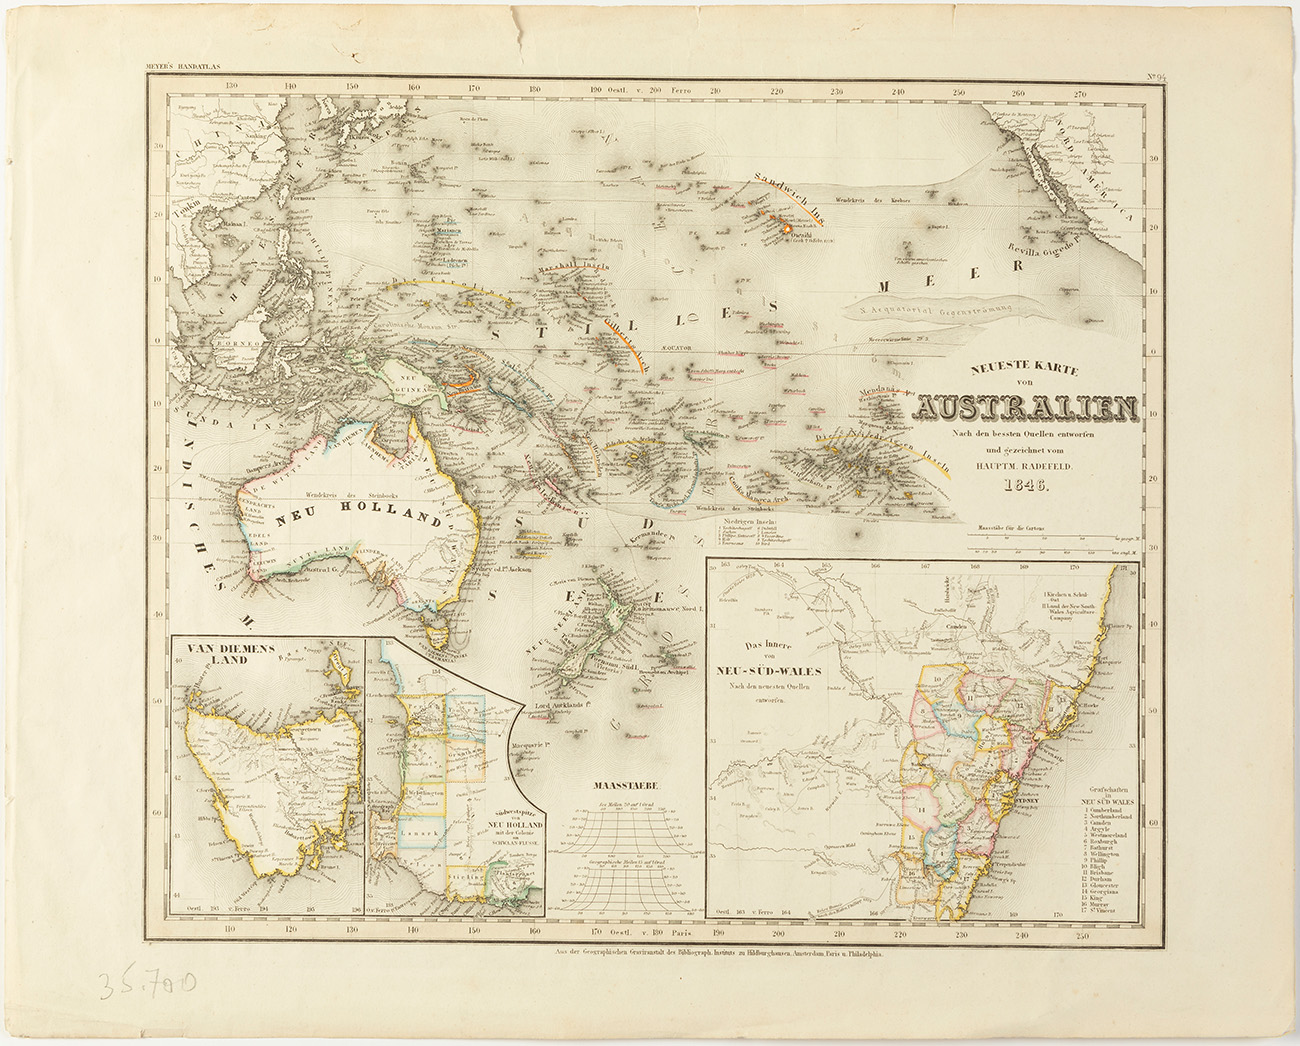 Map of Australia from 1846.Engraving on paper.German edition designed by Hauptm Radefeld.Moisture